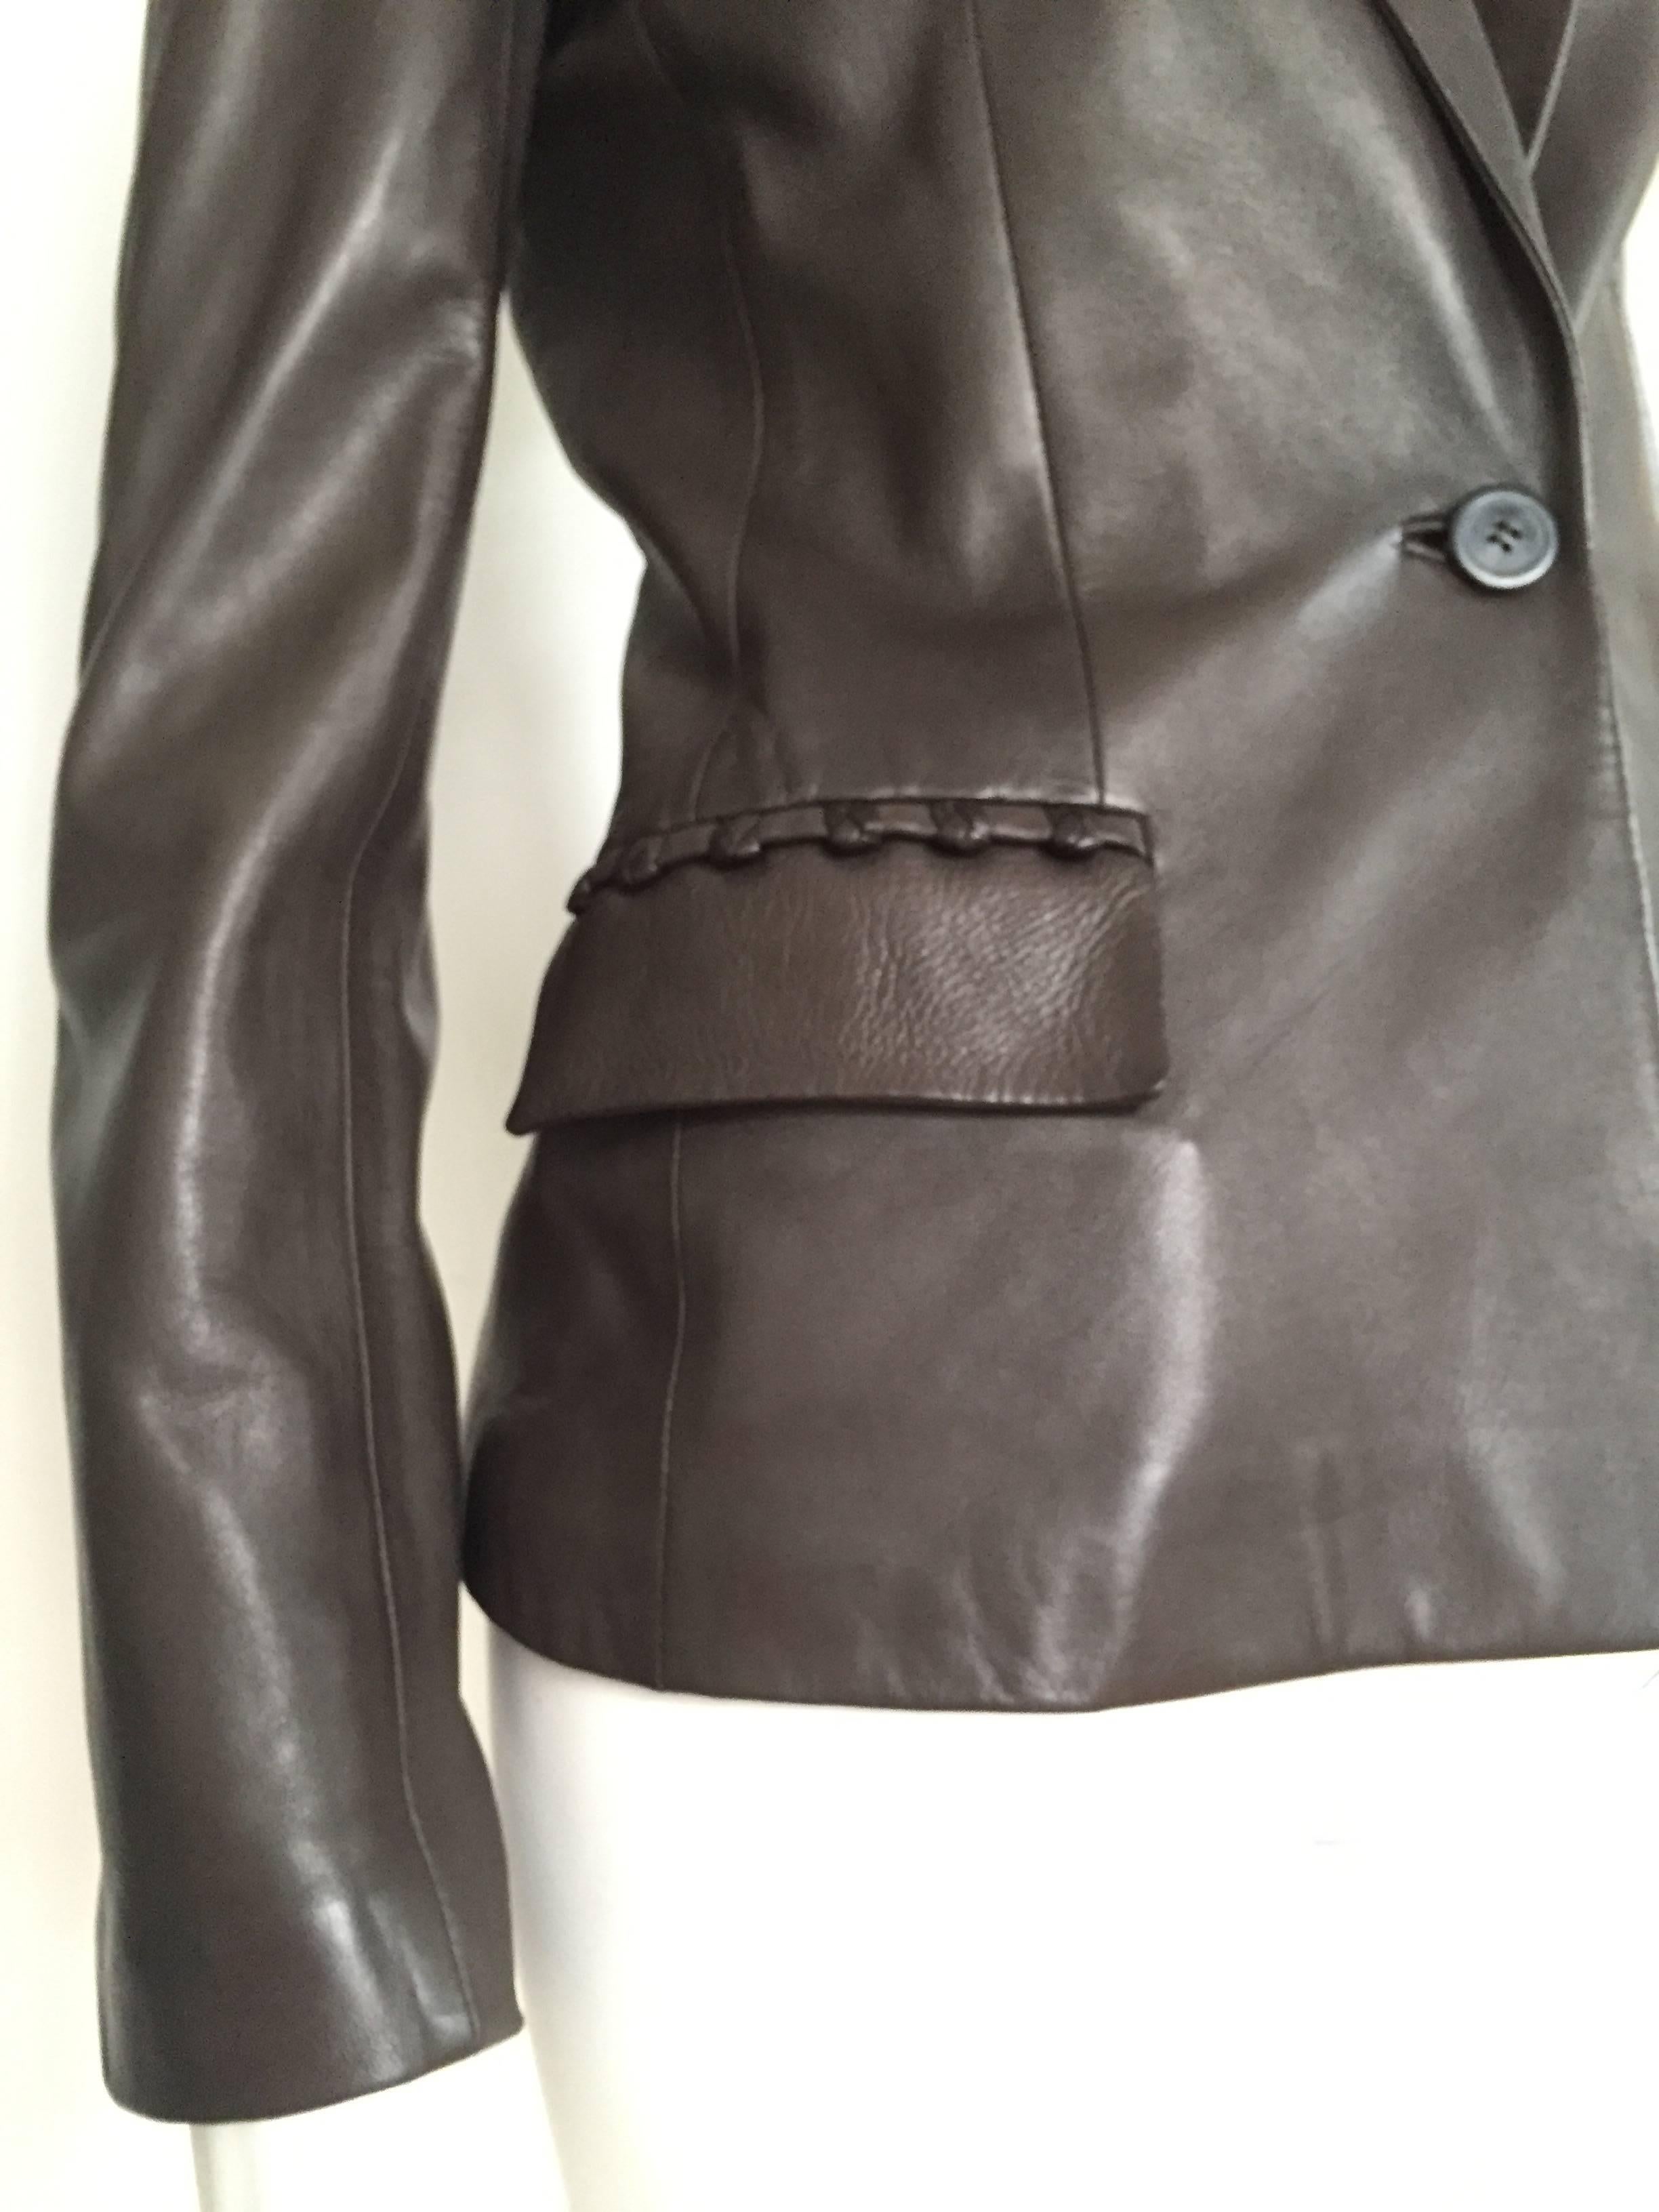 Yves Saint Laurent Rive Gauche by Tom Ford 2002 chocolate leather runway jacket is a Italian size 38 and a USA size 4 ( Please see & use the measurements below so that you can properly measure your body to make certain that this will fit the way Tom